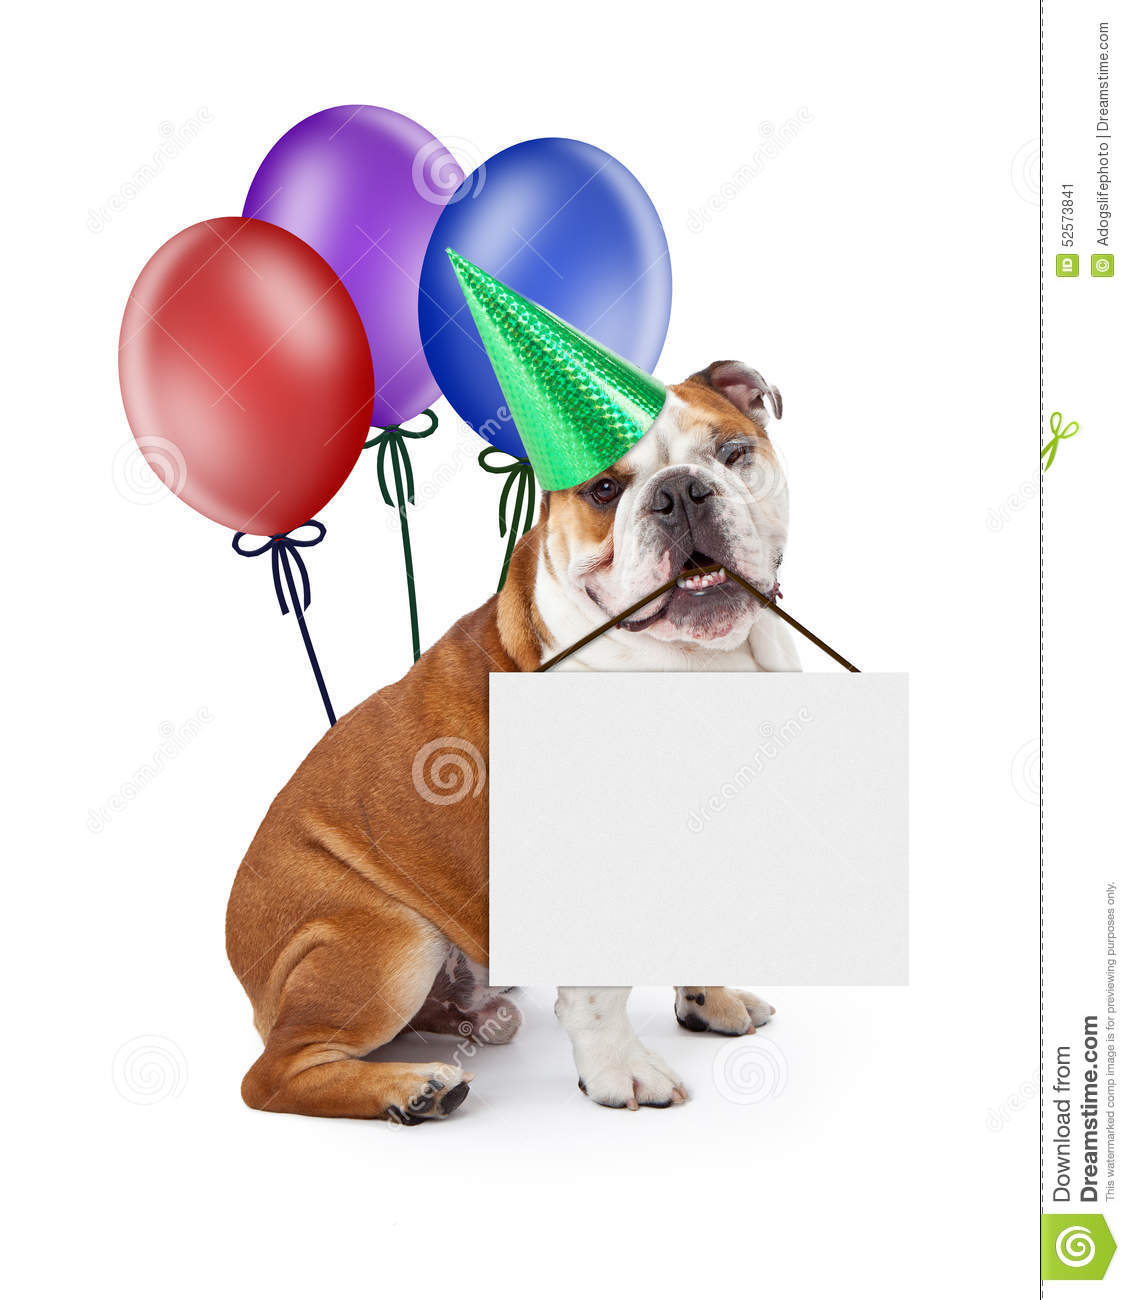 Birthday Dog Holding Blank Sign With Balloons Stock Photo   Image